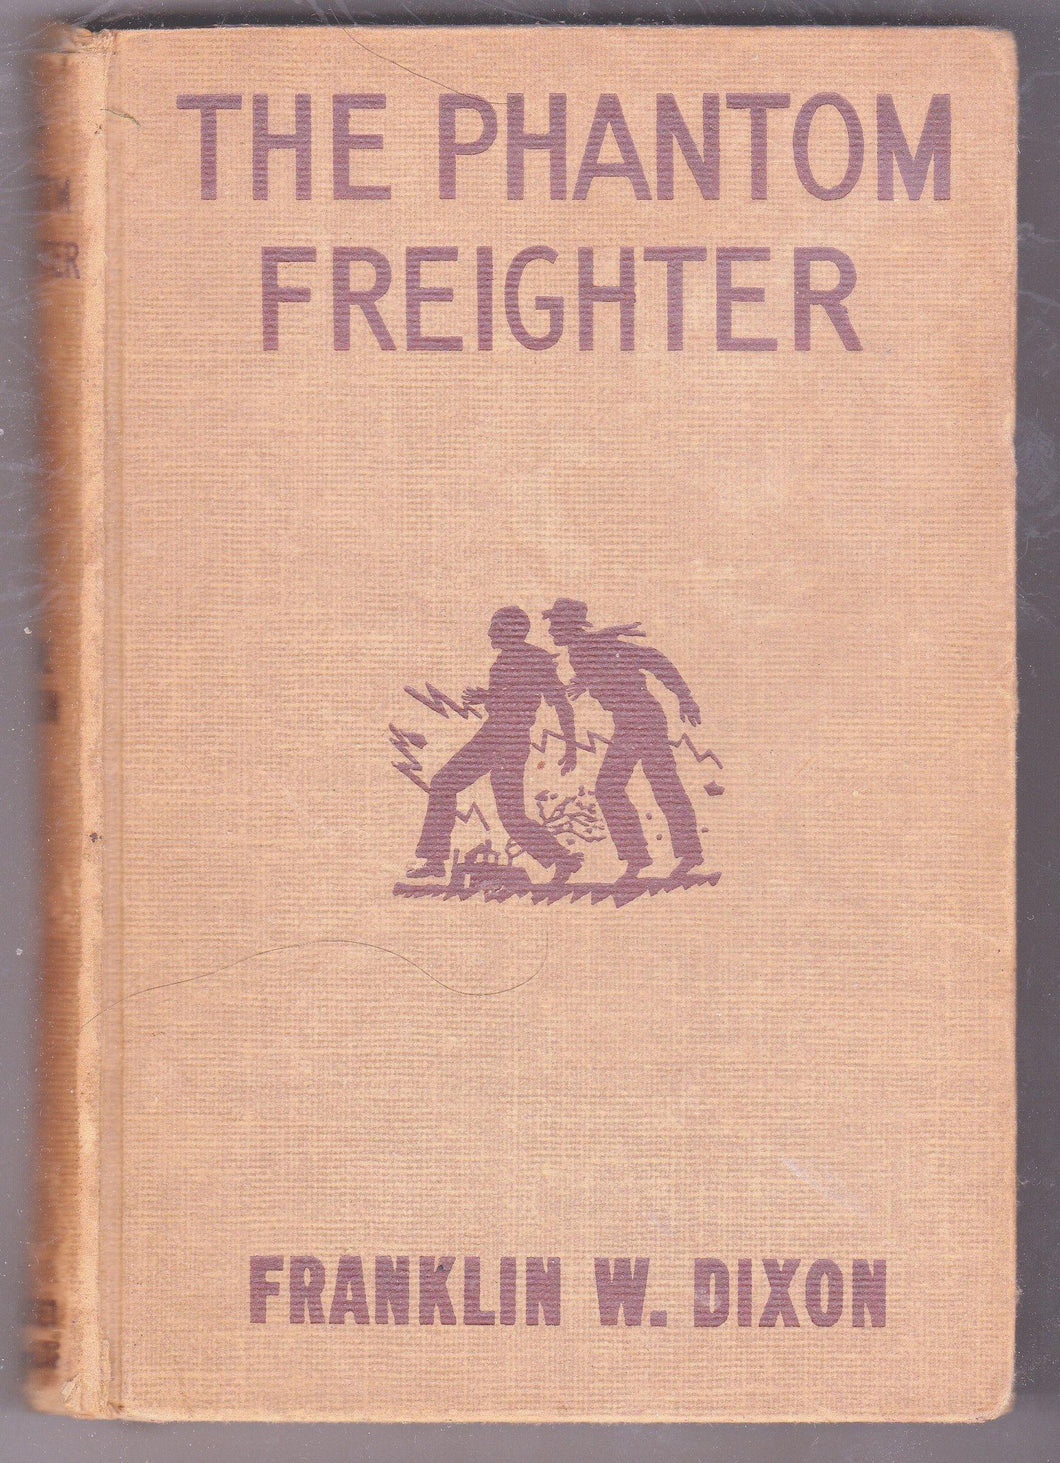 The Hardy Boys Mystery Stories The Phantom Freighter Franklin W Dixon 1947 Hardcover - TulipStuff